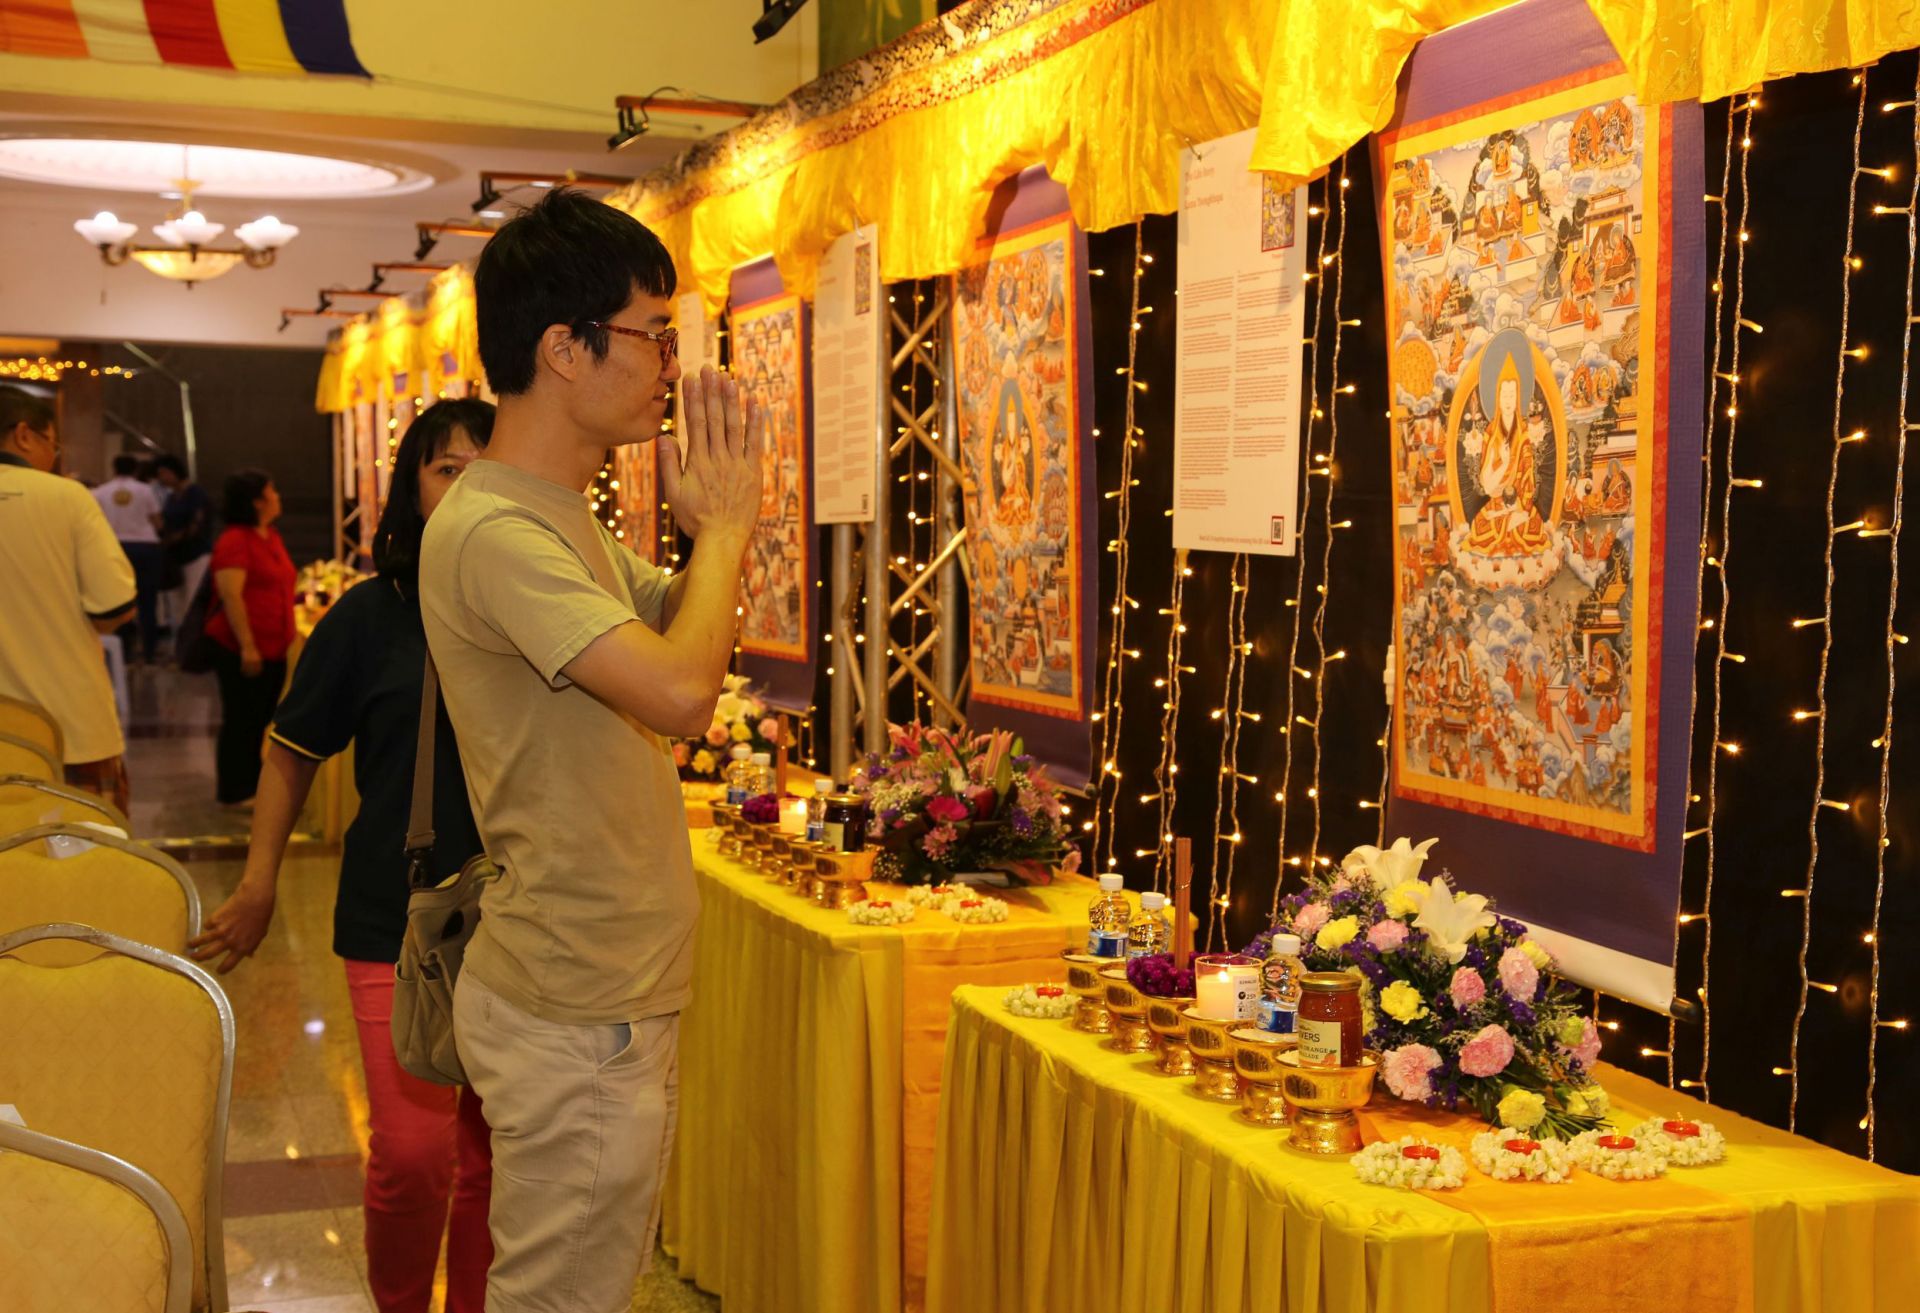 People standing in front of thankgas of Lama Tsongkhapa hung on a wall with tables covered in offerings below them.